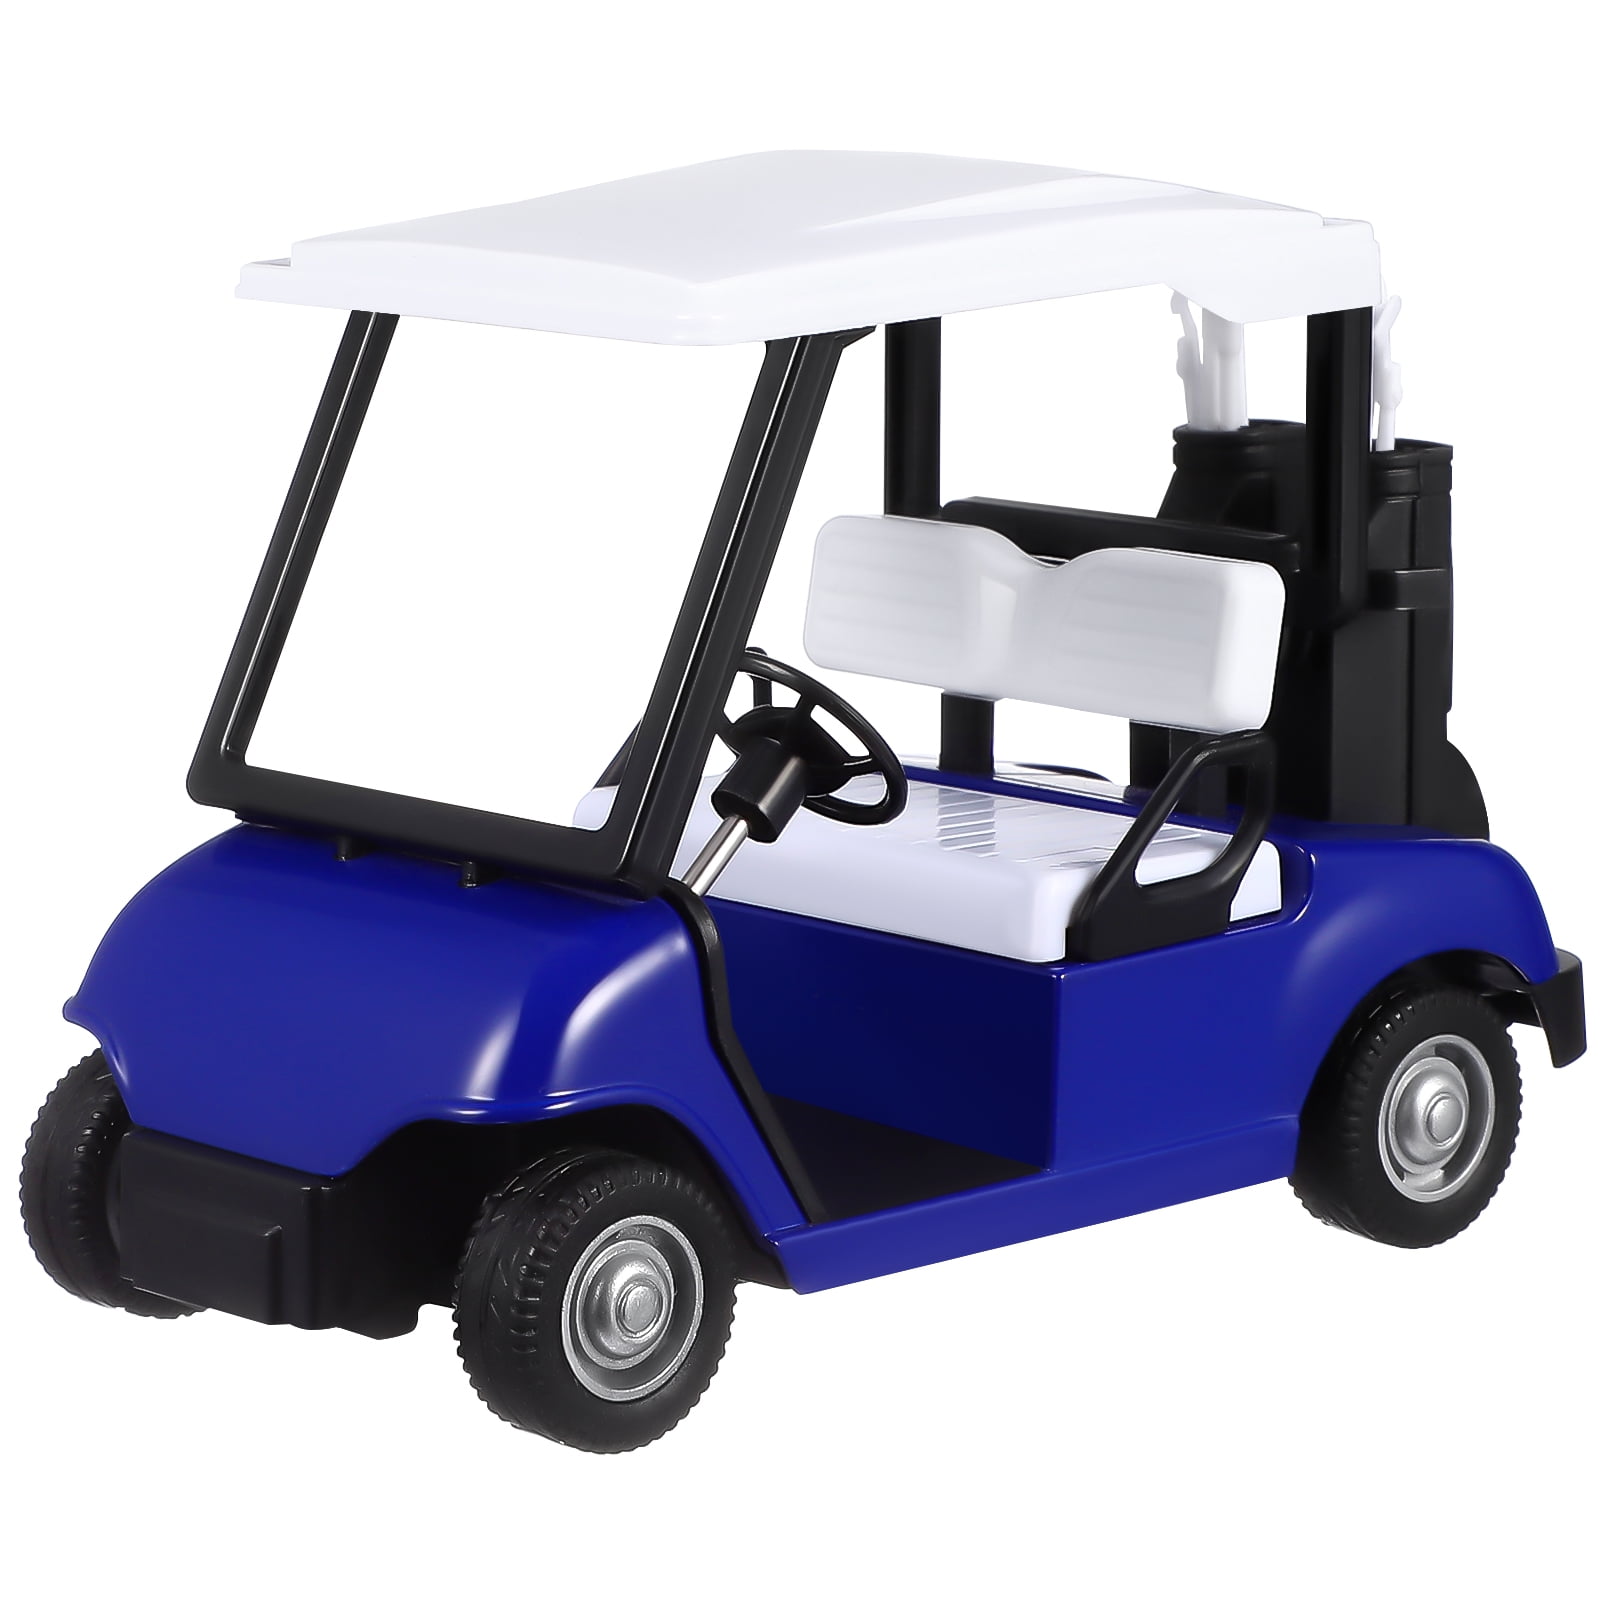 Golf Cart Model Die Casting Model Toy Vehicle Figurine Home Ornament for  Kids